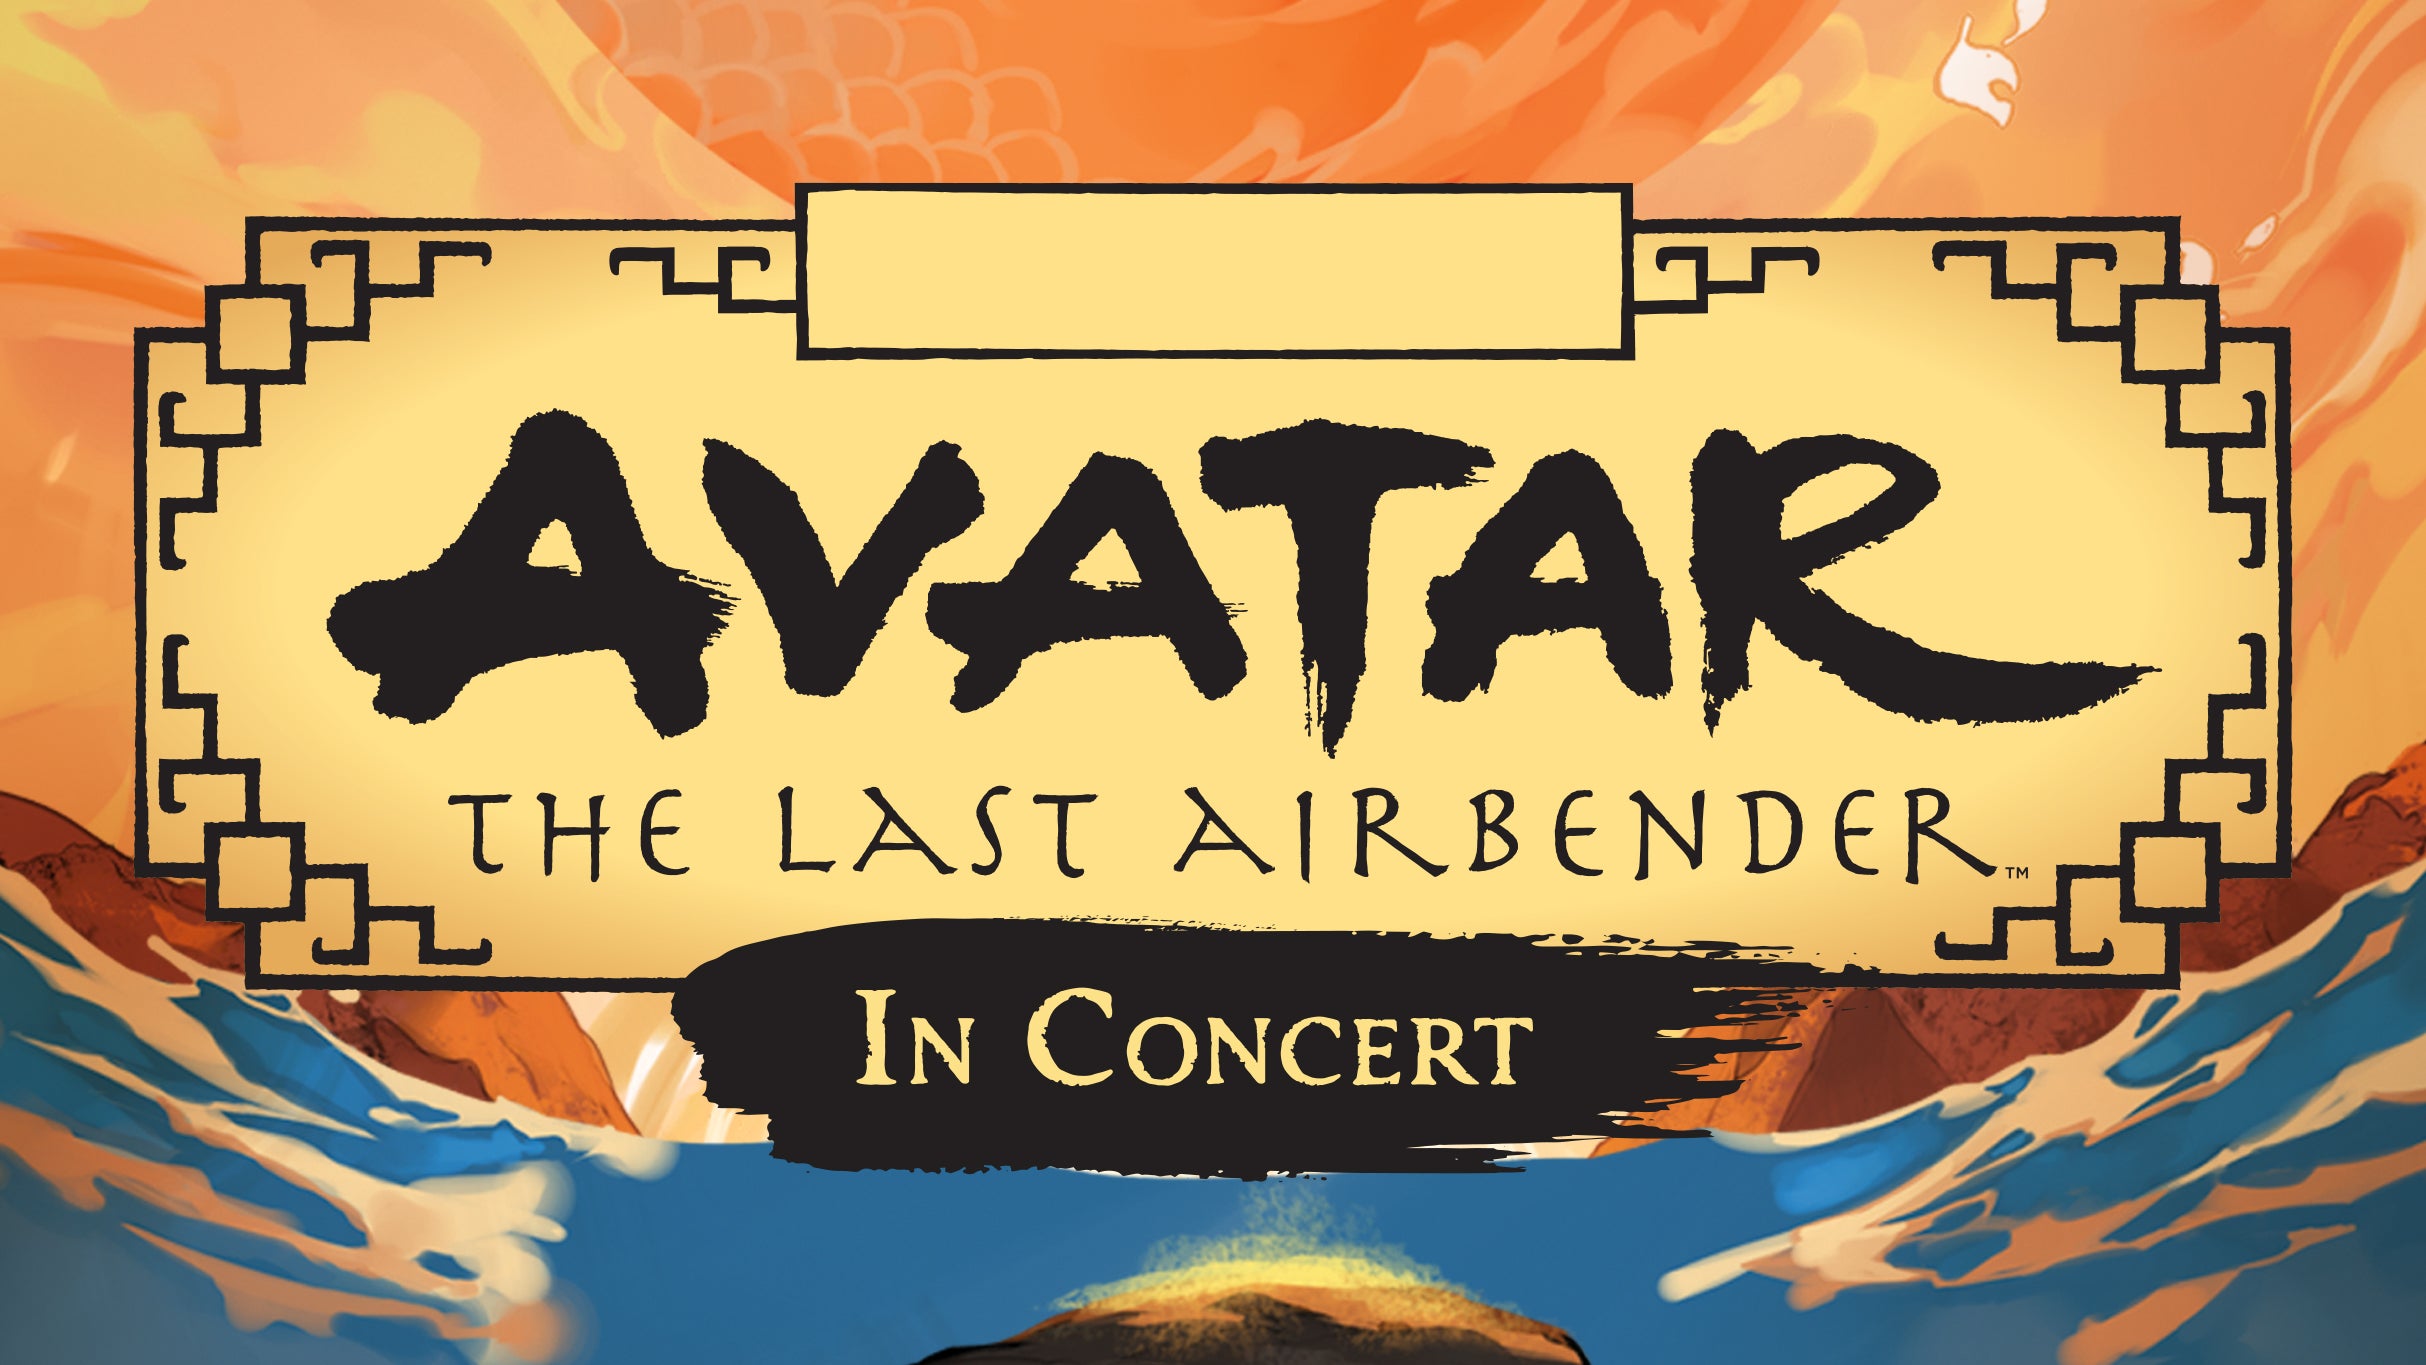 Avatar - The Last Airbender presale code for show tickets in San Diego, CA (San Diego Civic Theatre)